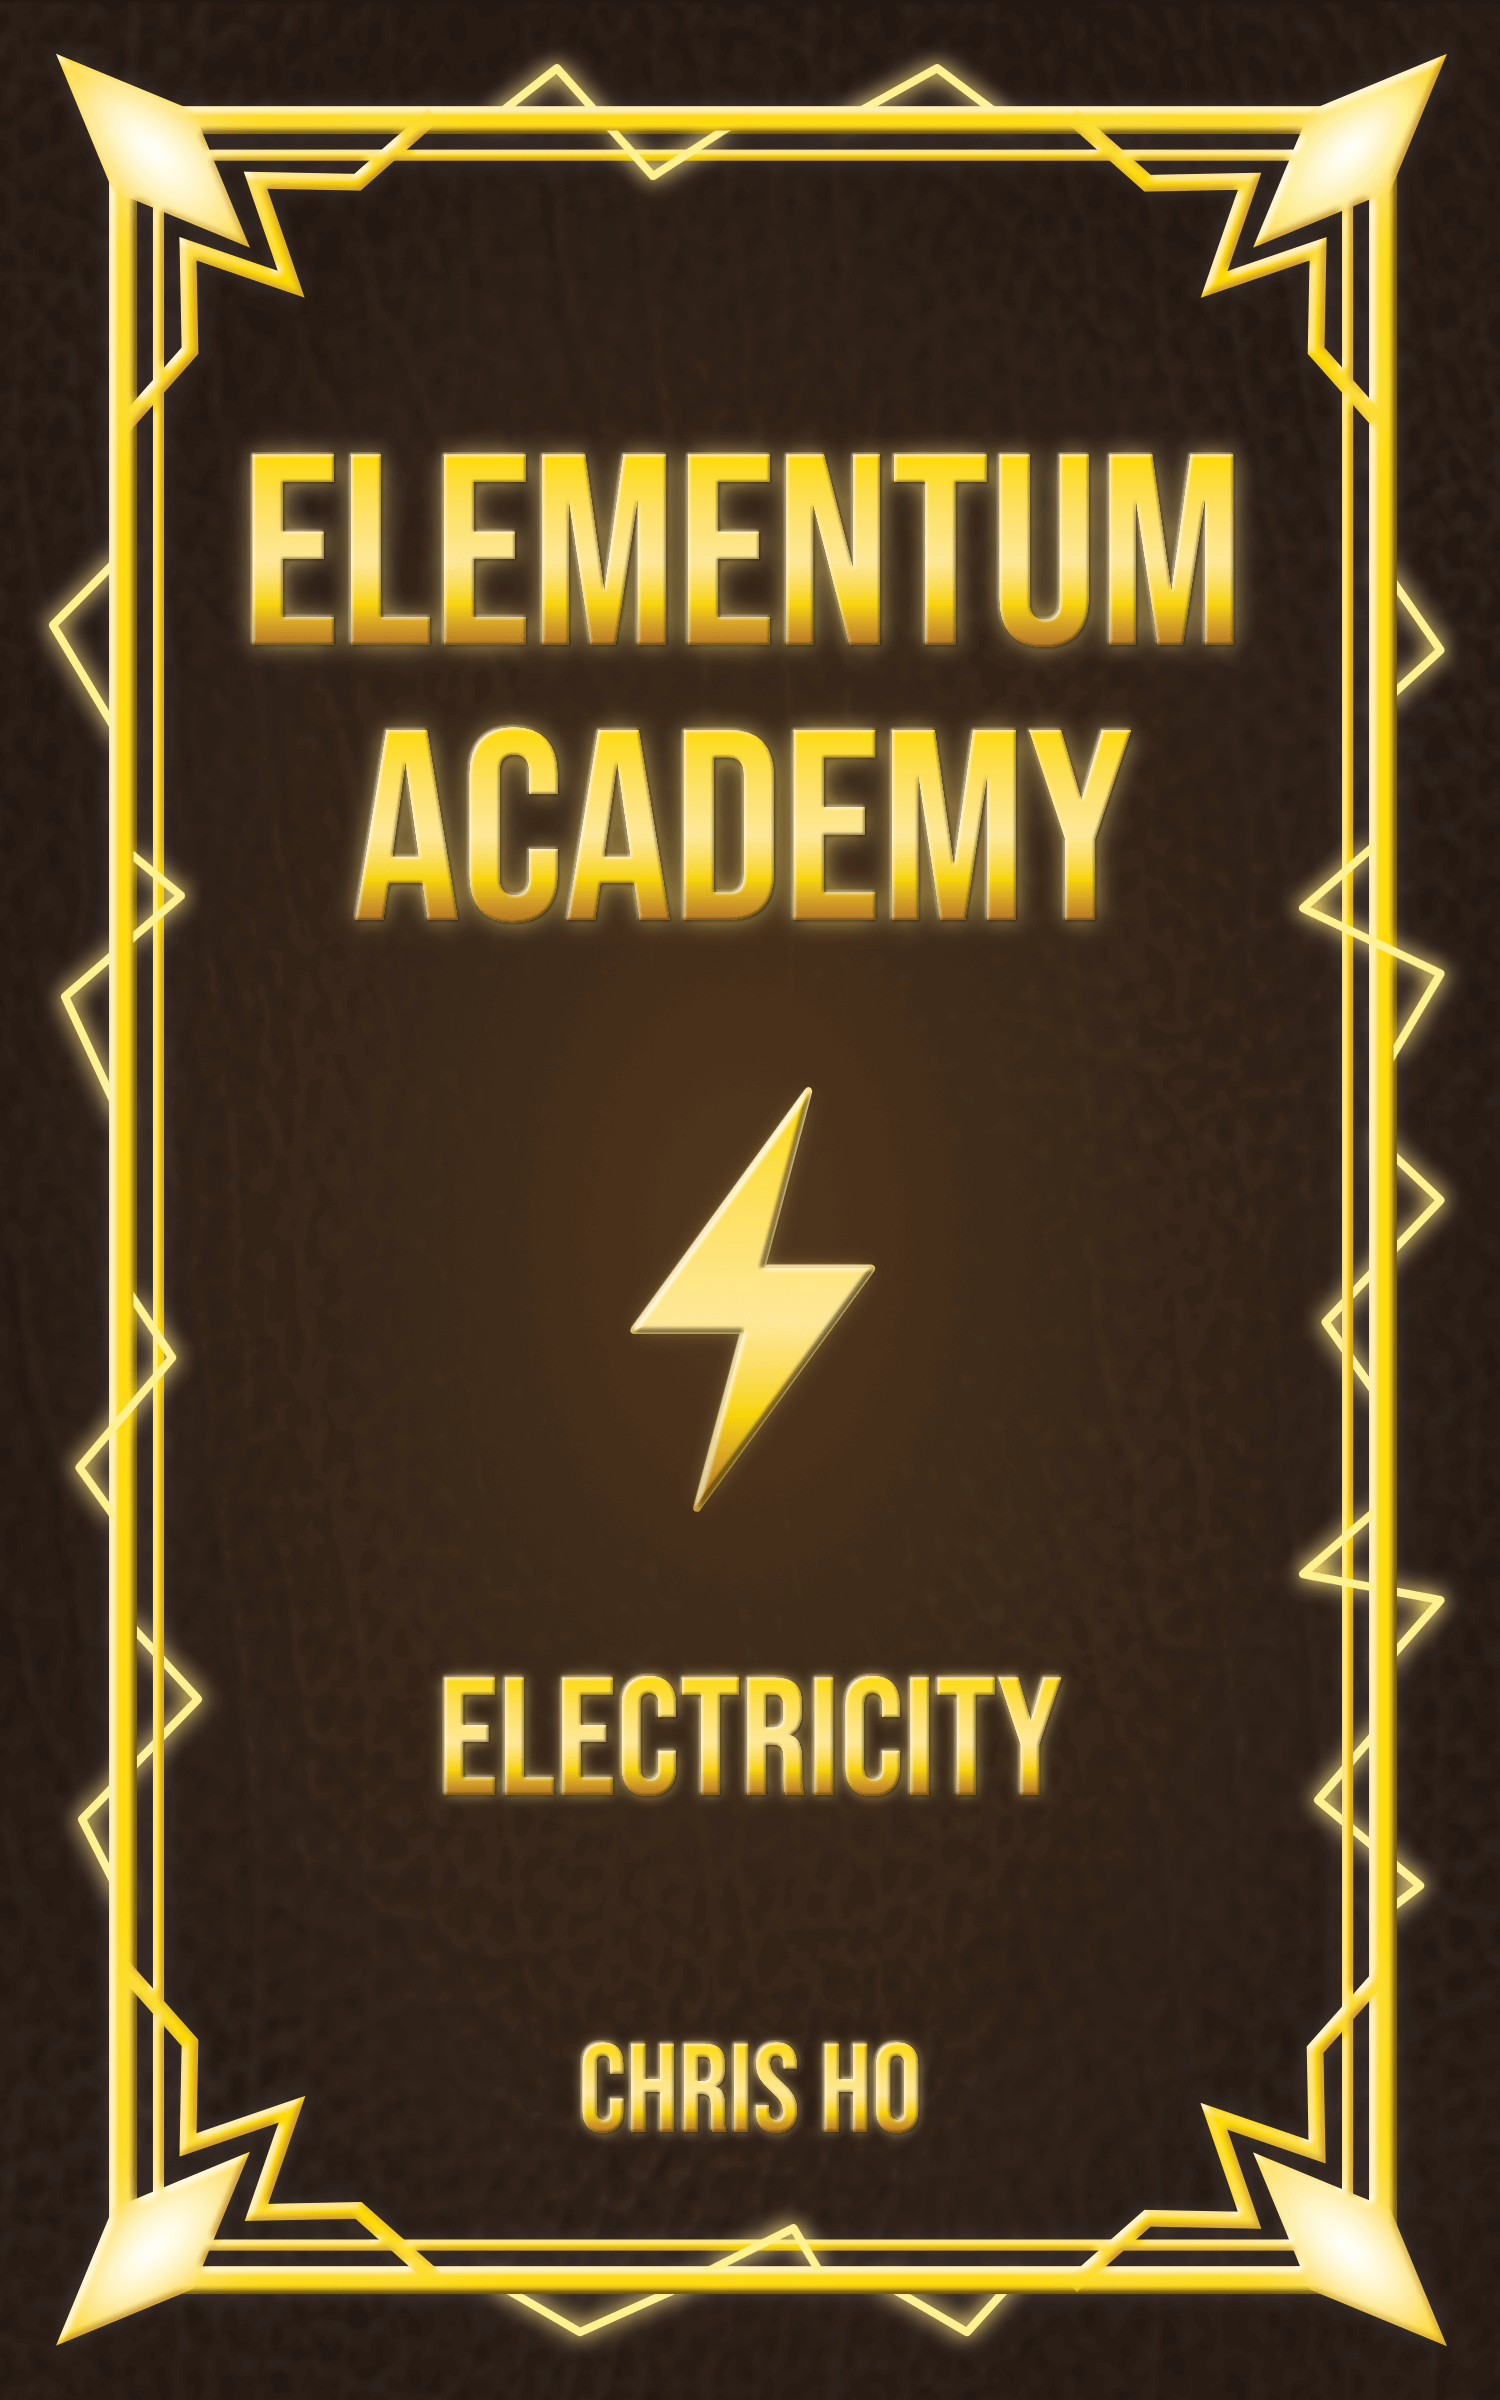 Elementum Academy: Electricity Book Cover